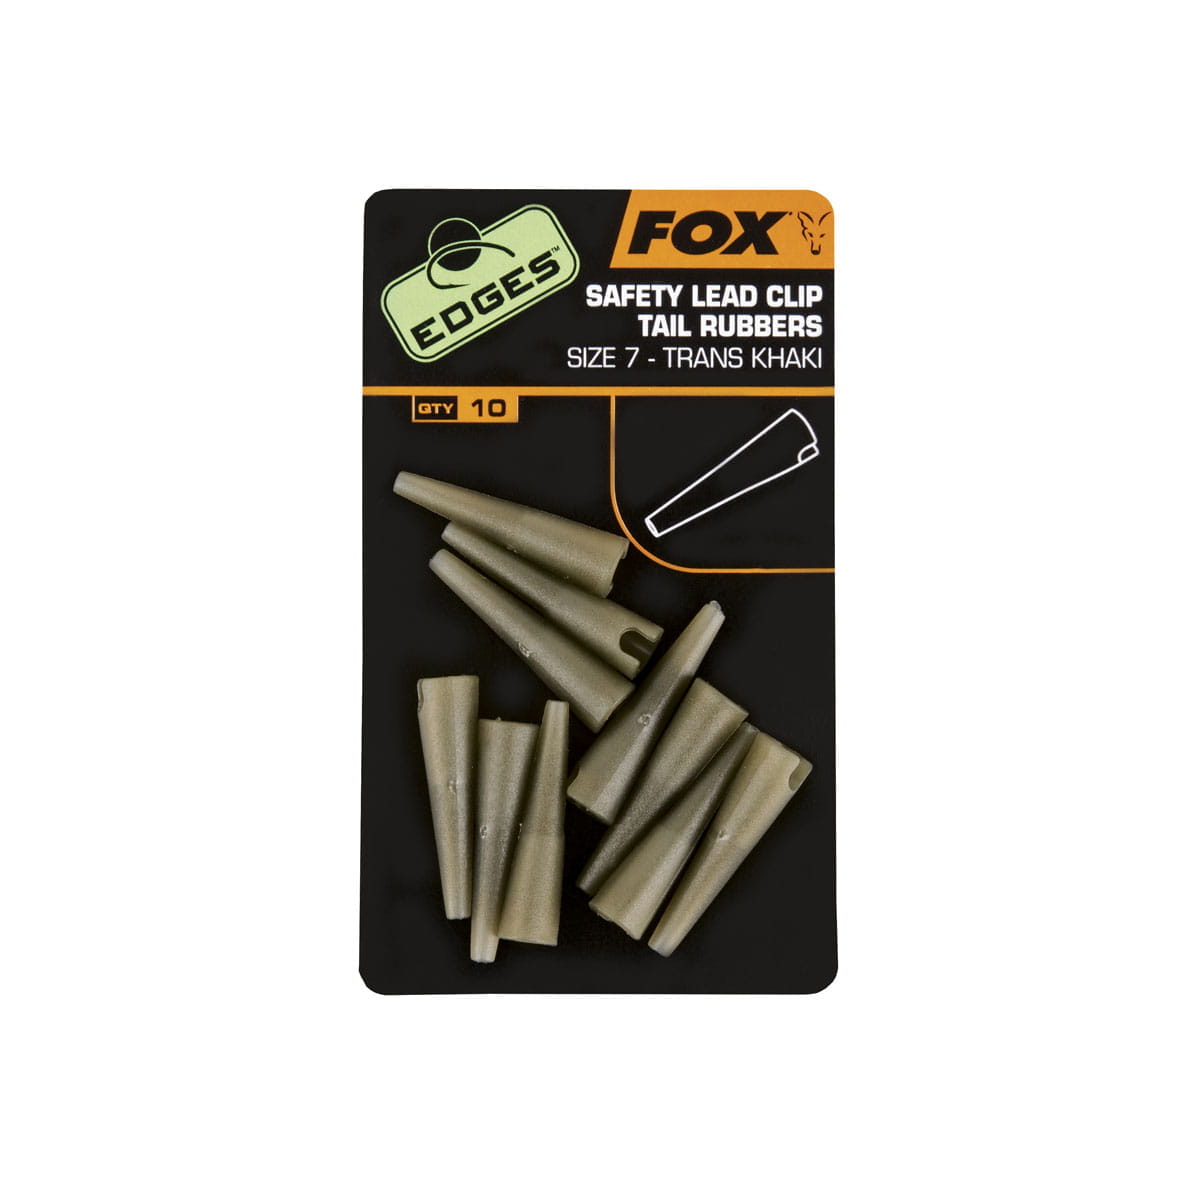 Fox Edges Safety Lead Clip Tail Rubbers Size 7 (Symbolfoto)